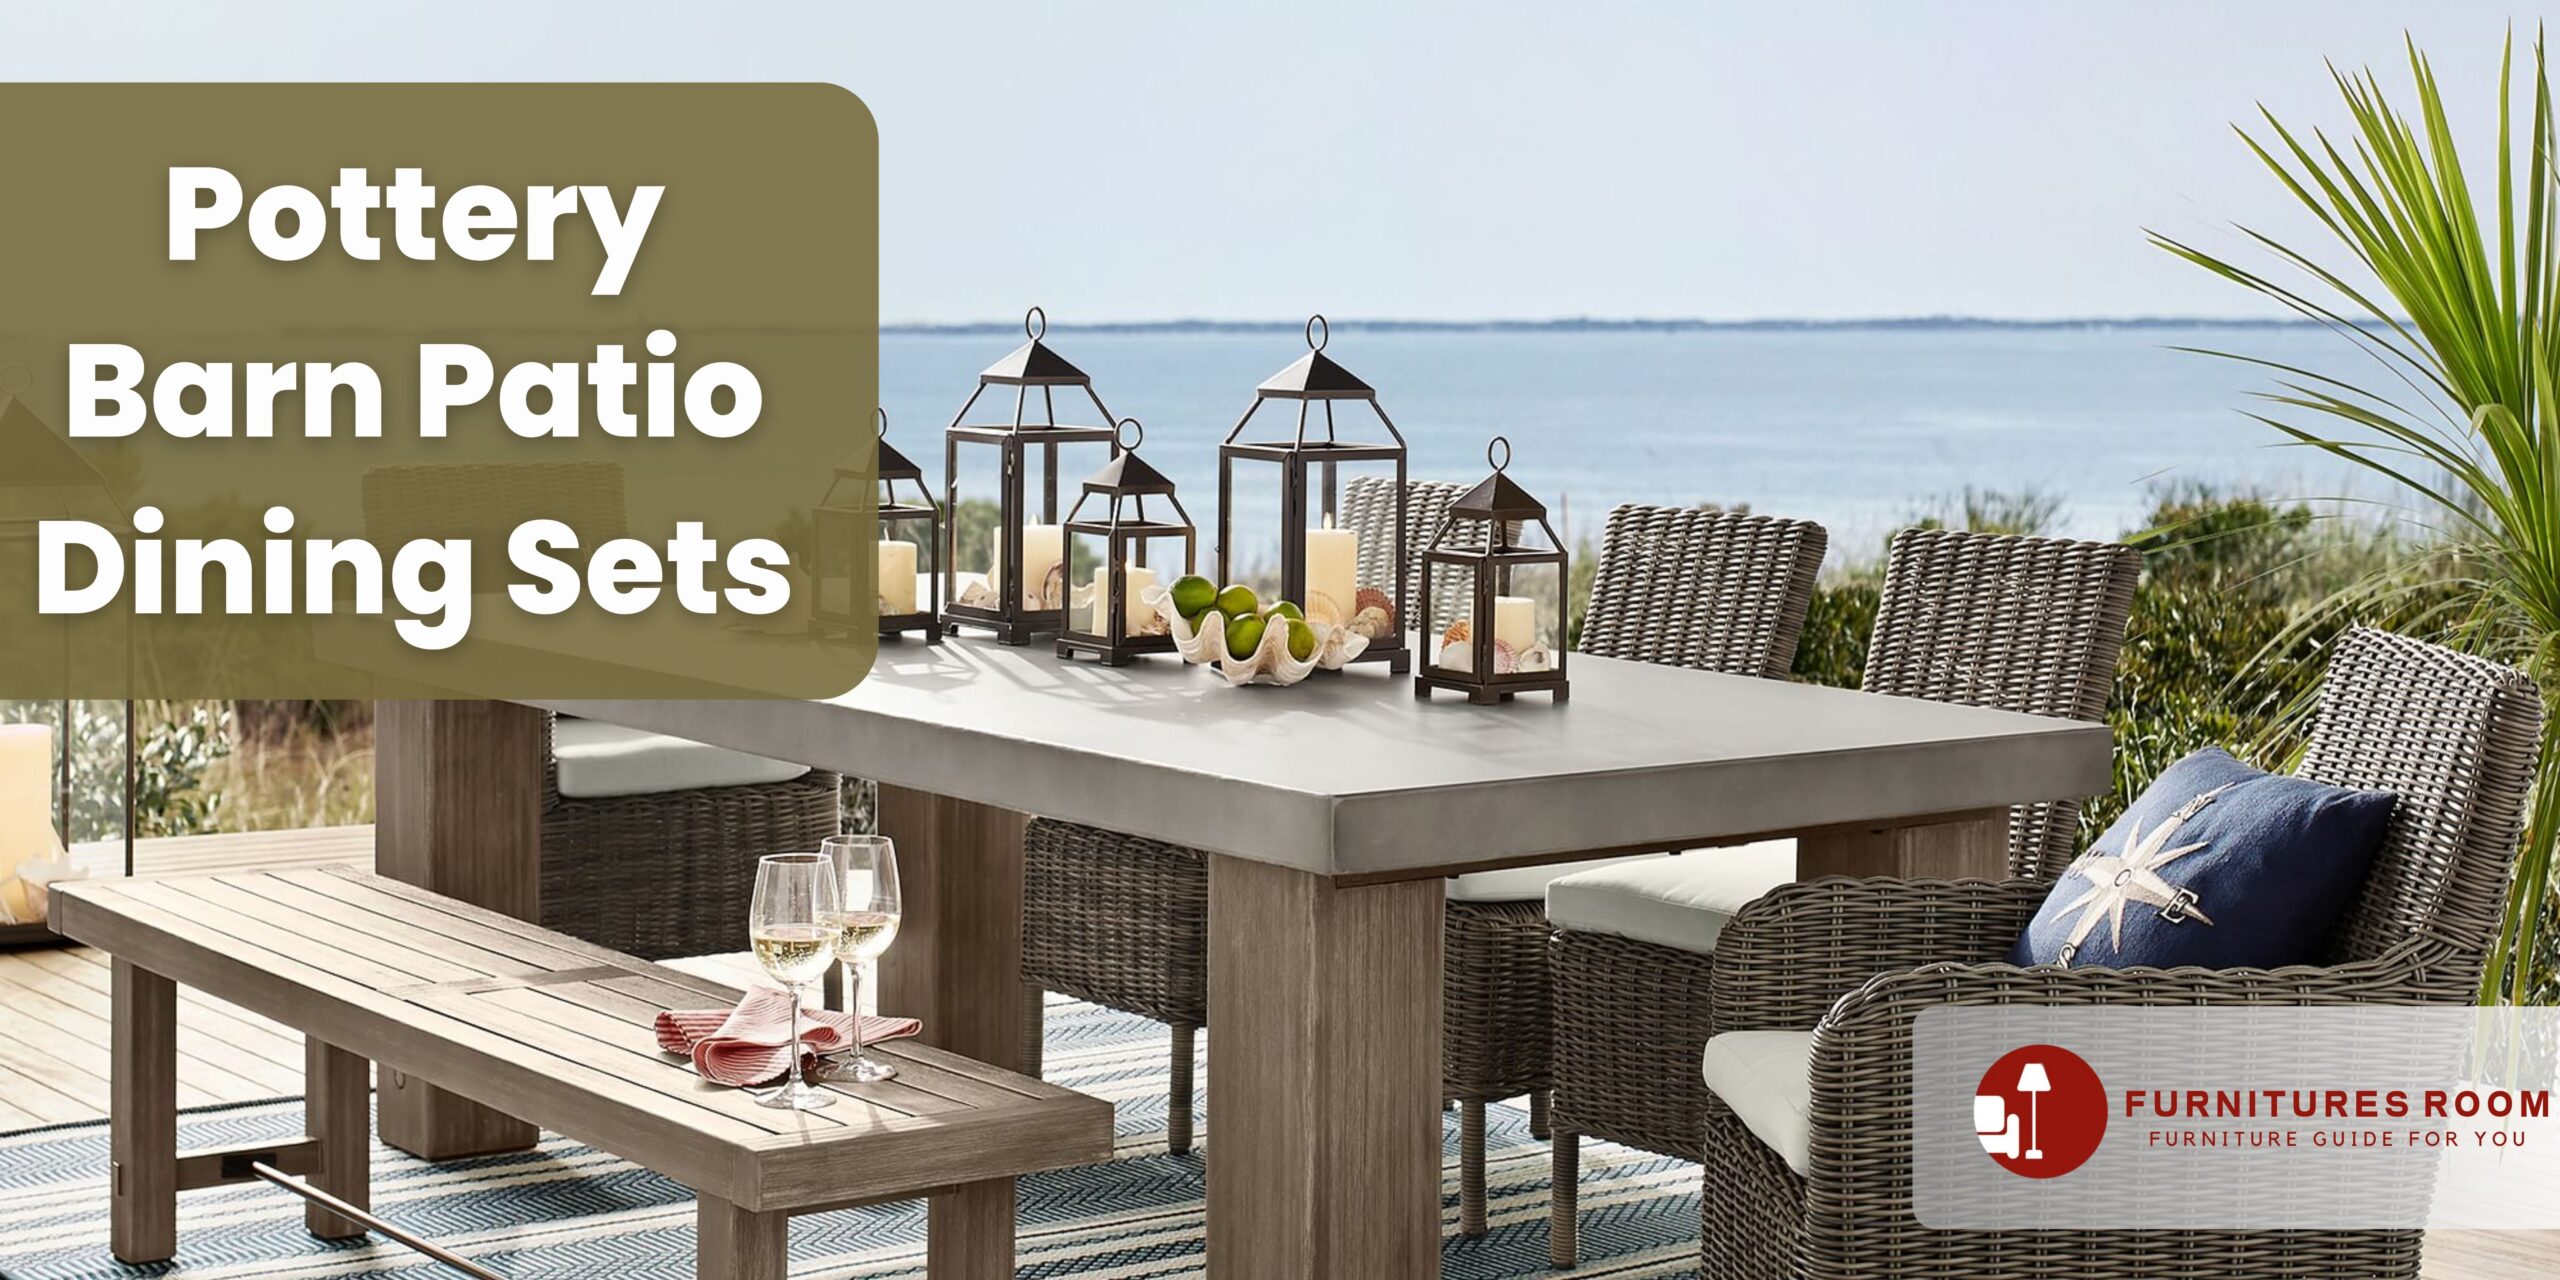  image for Pottery Barn Patio Dining Sets concept 